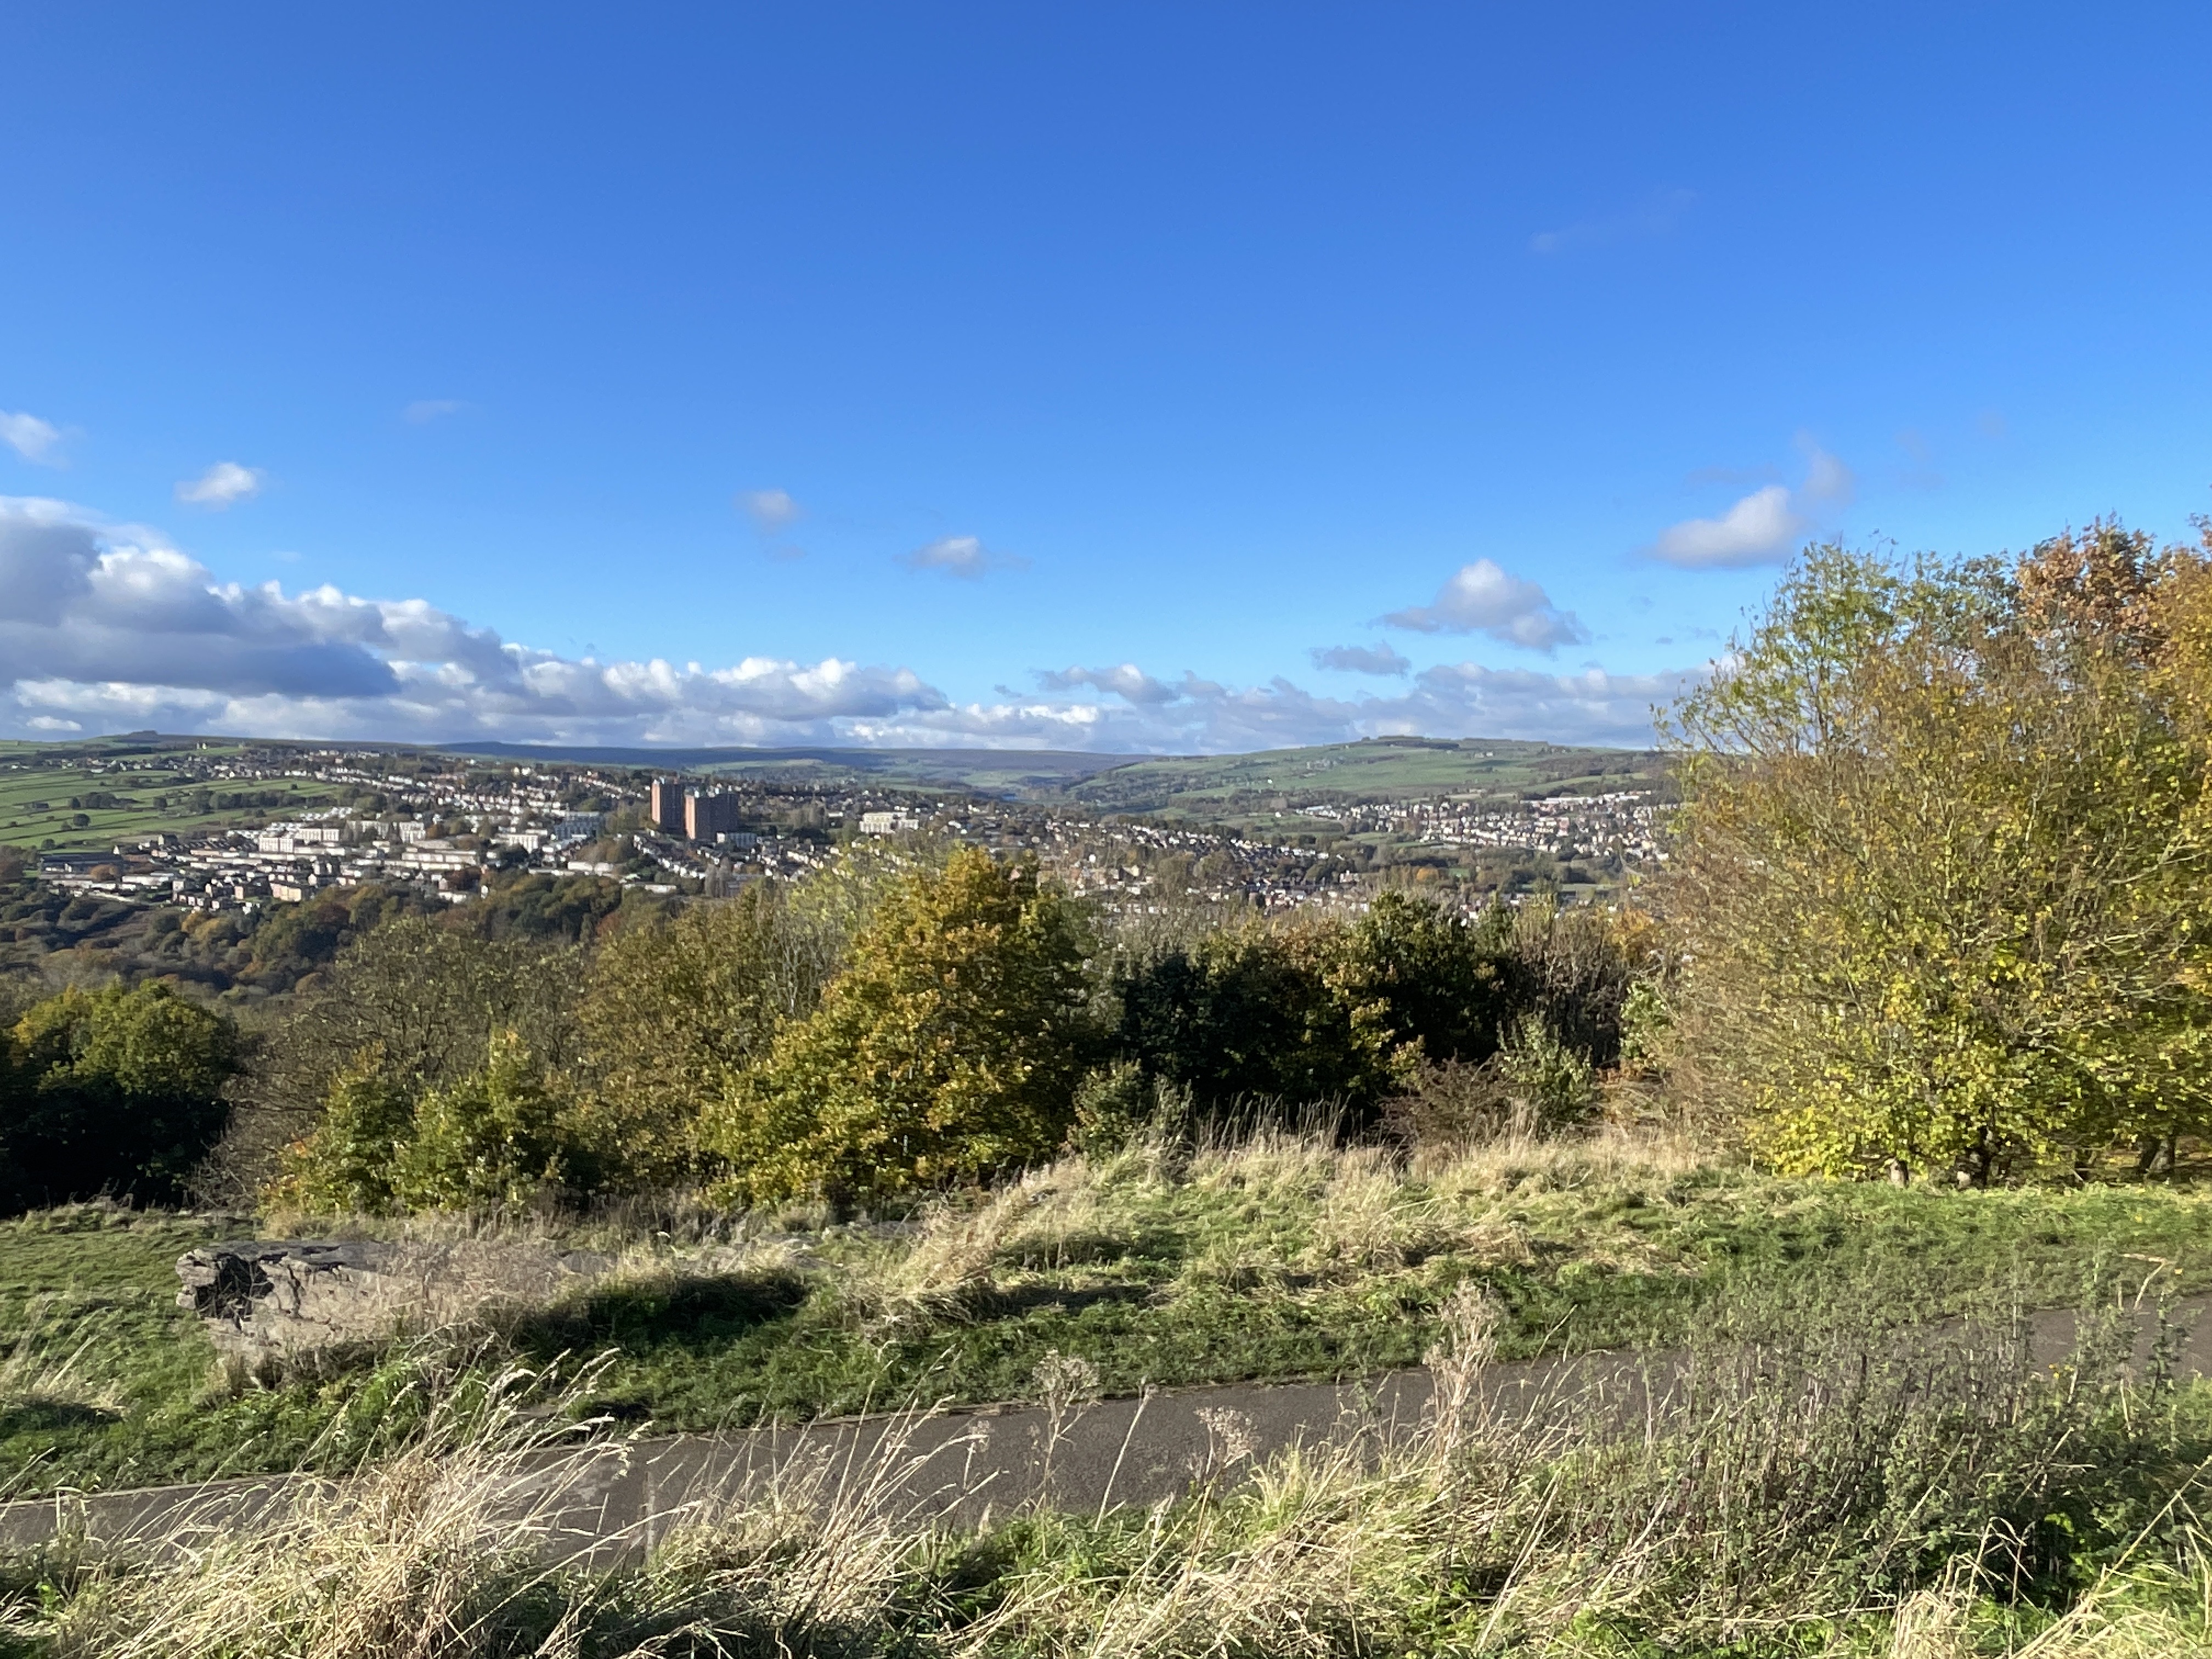 view of the neighborough of Stannington in Sheffield as seen from the bole hills park